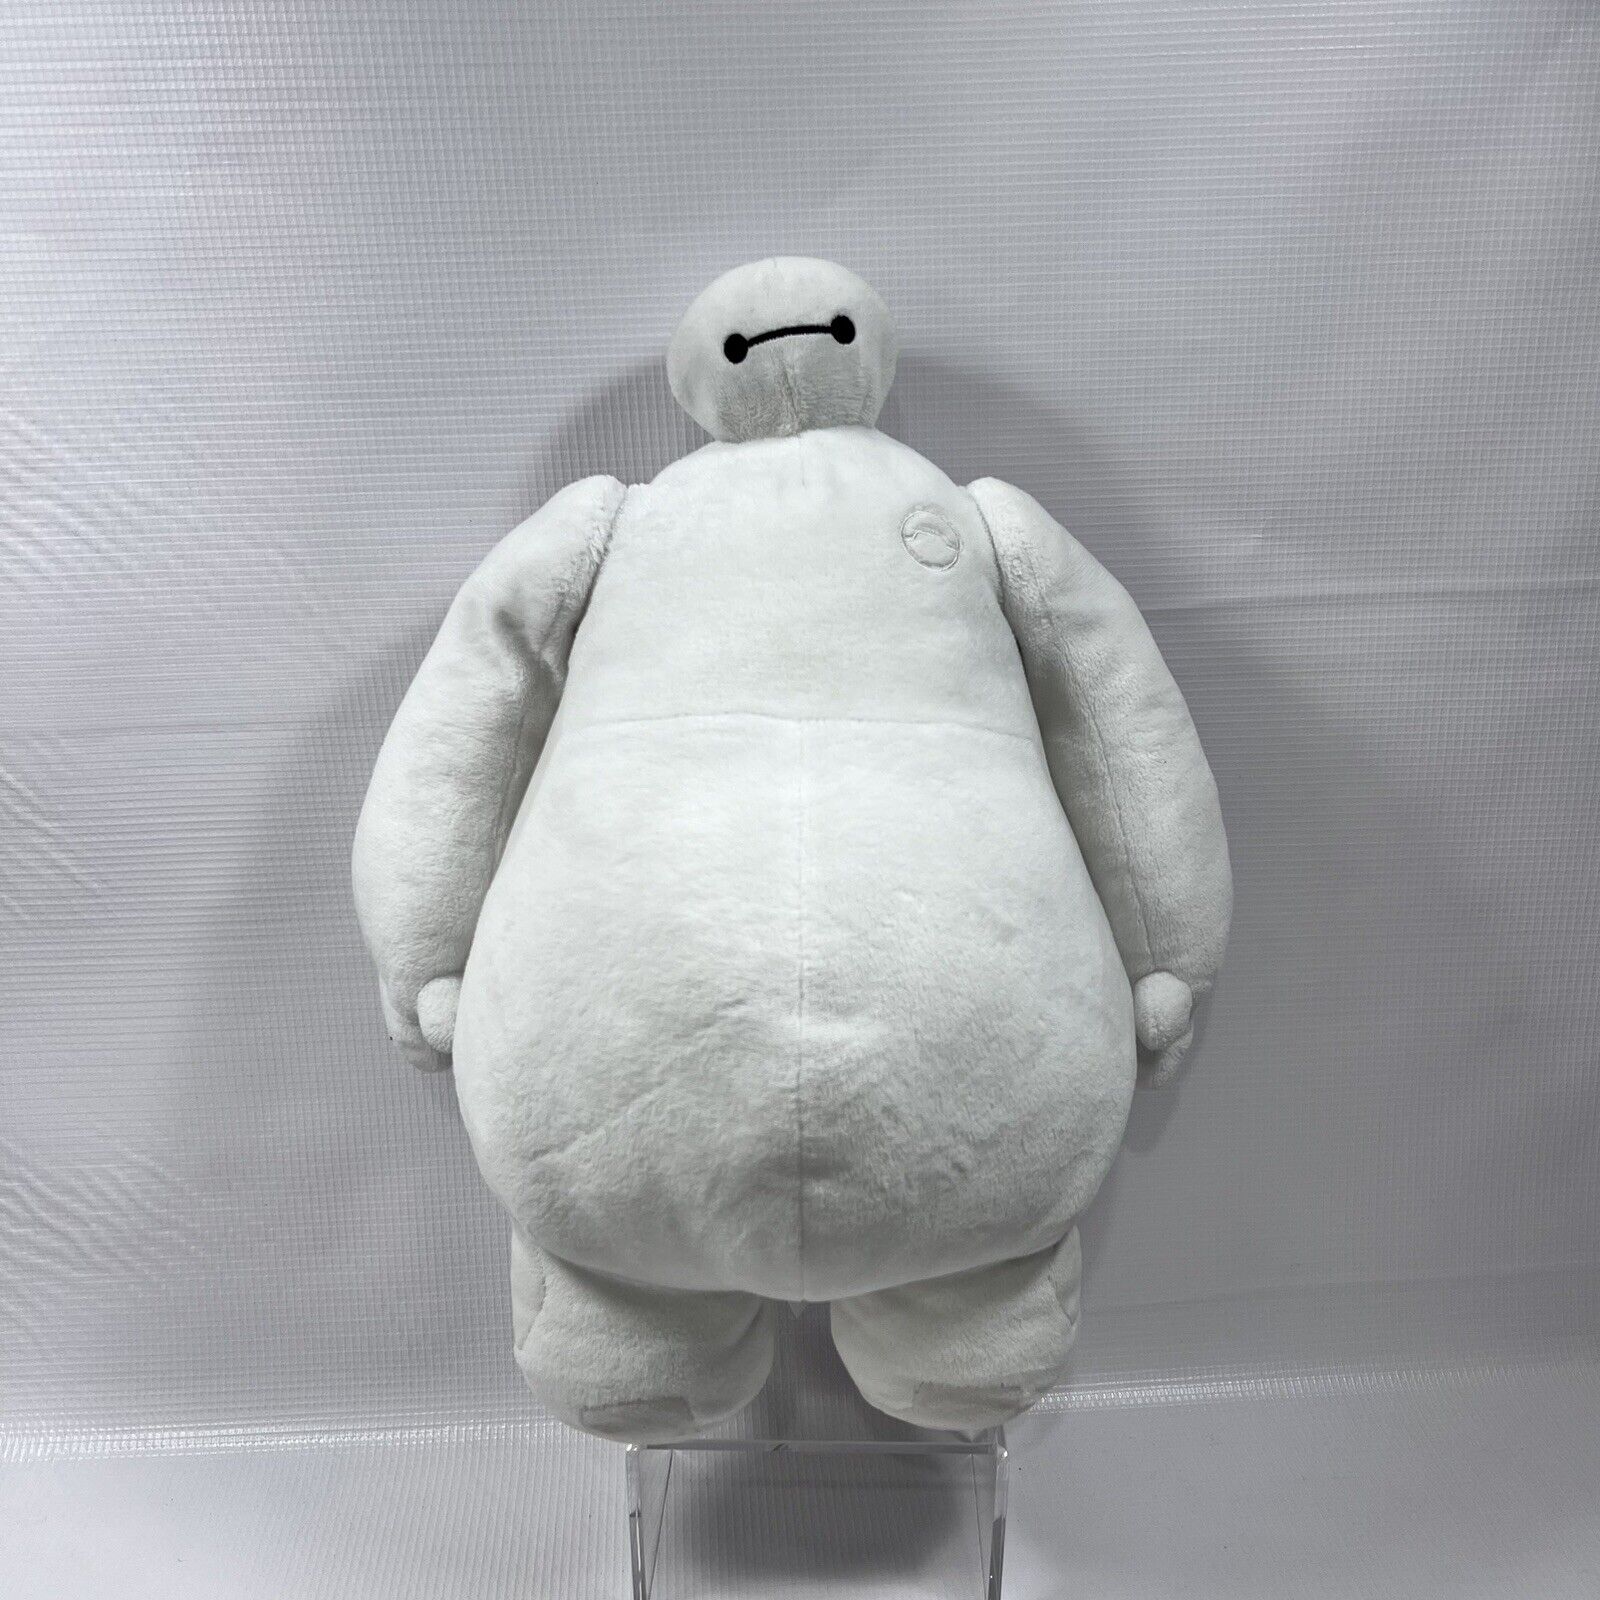 Disney Store Baymax Plush from Big Hero 6 15 inches Movable Arms